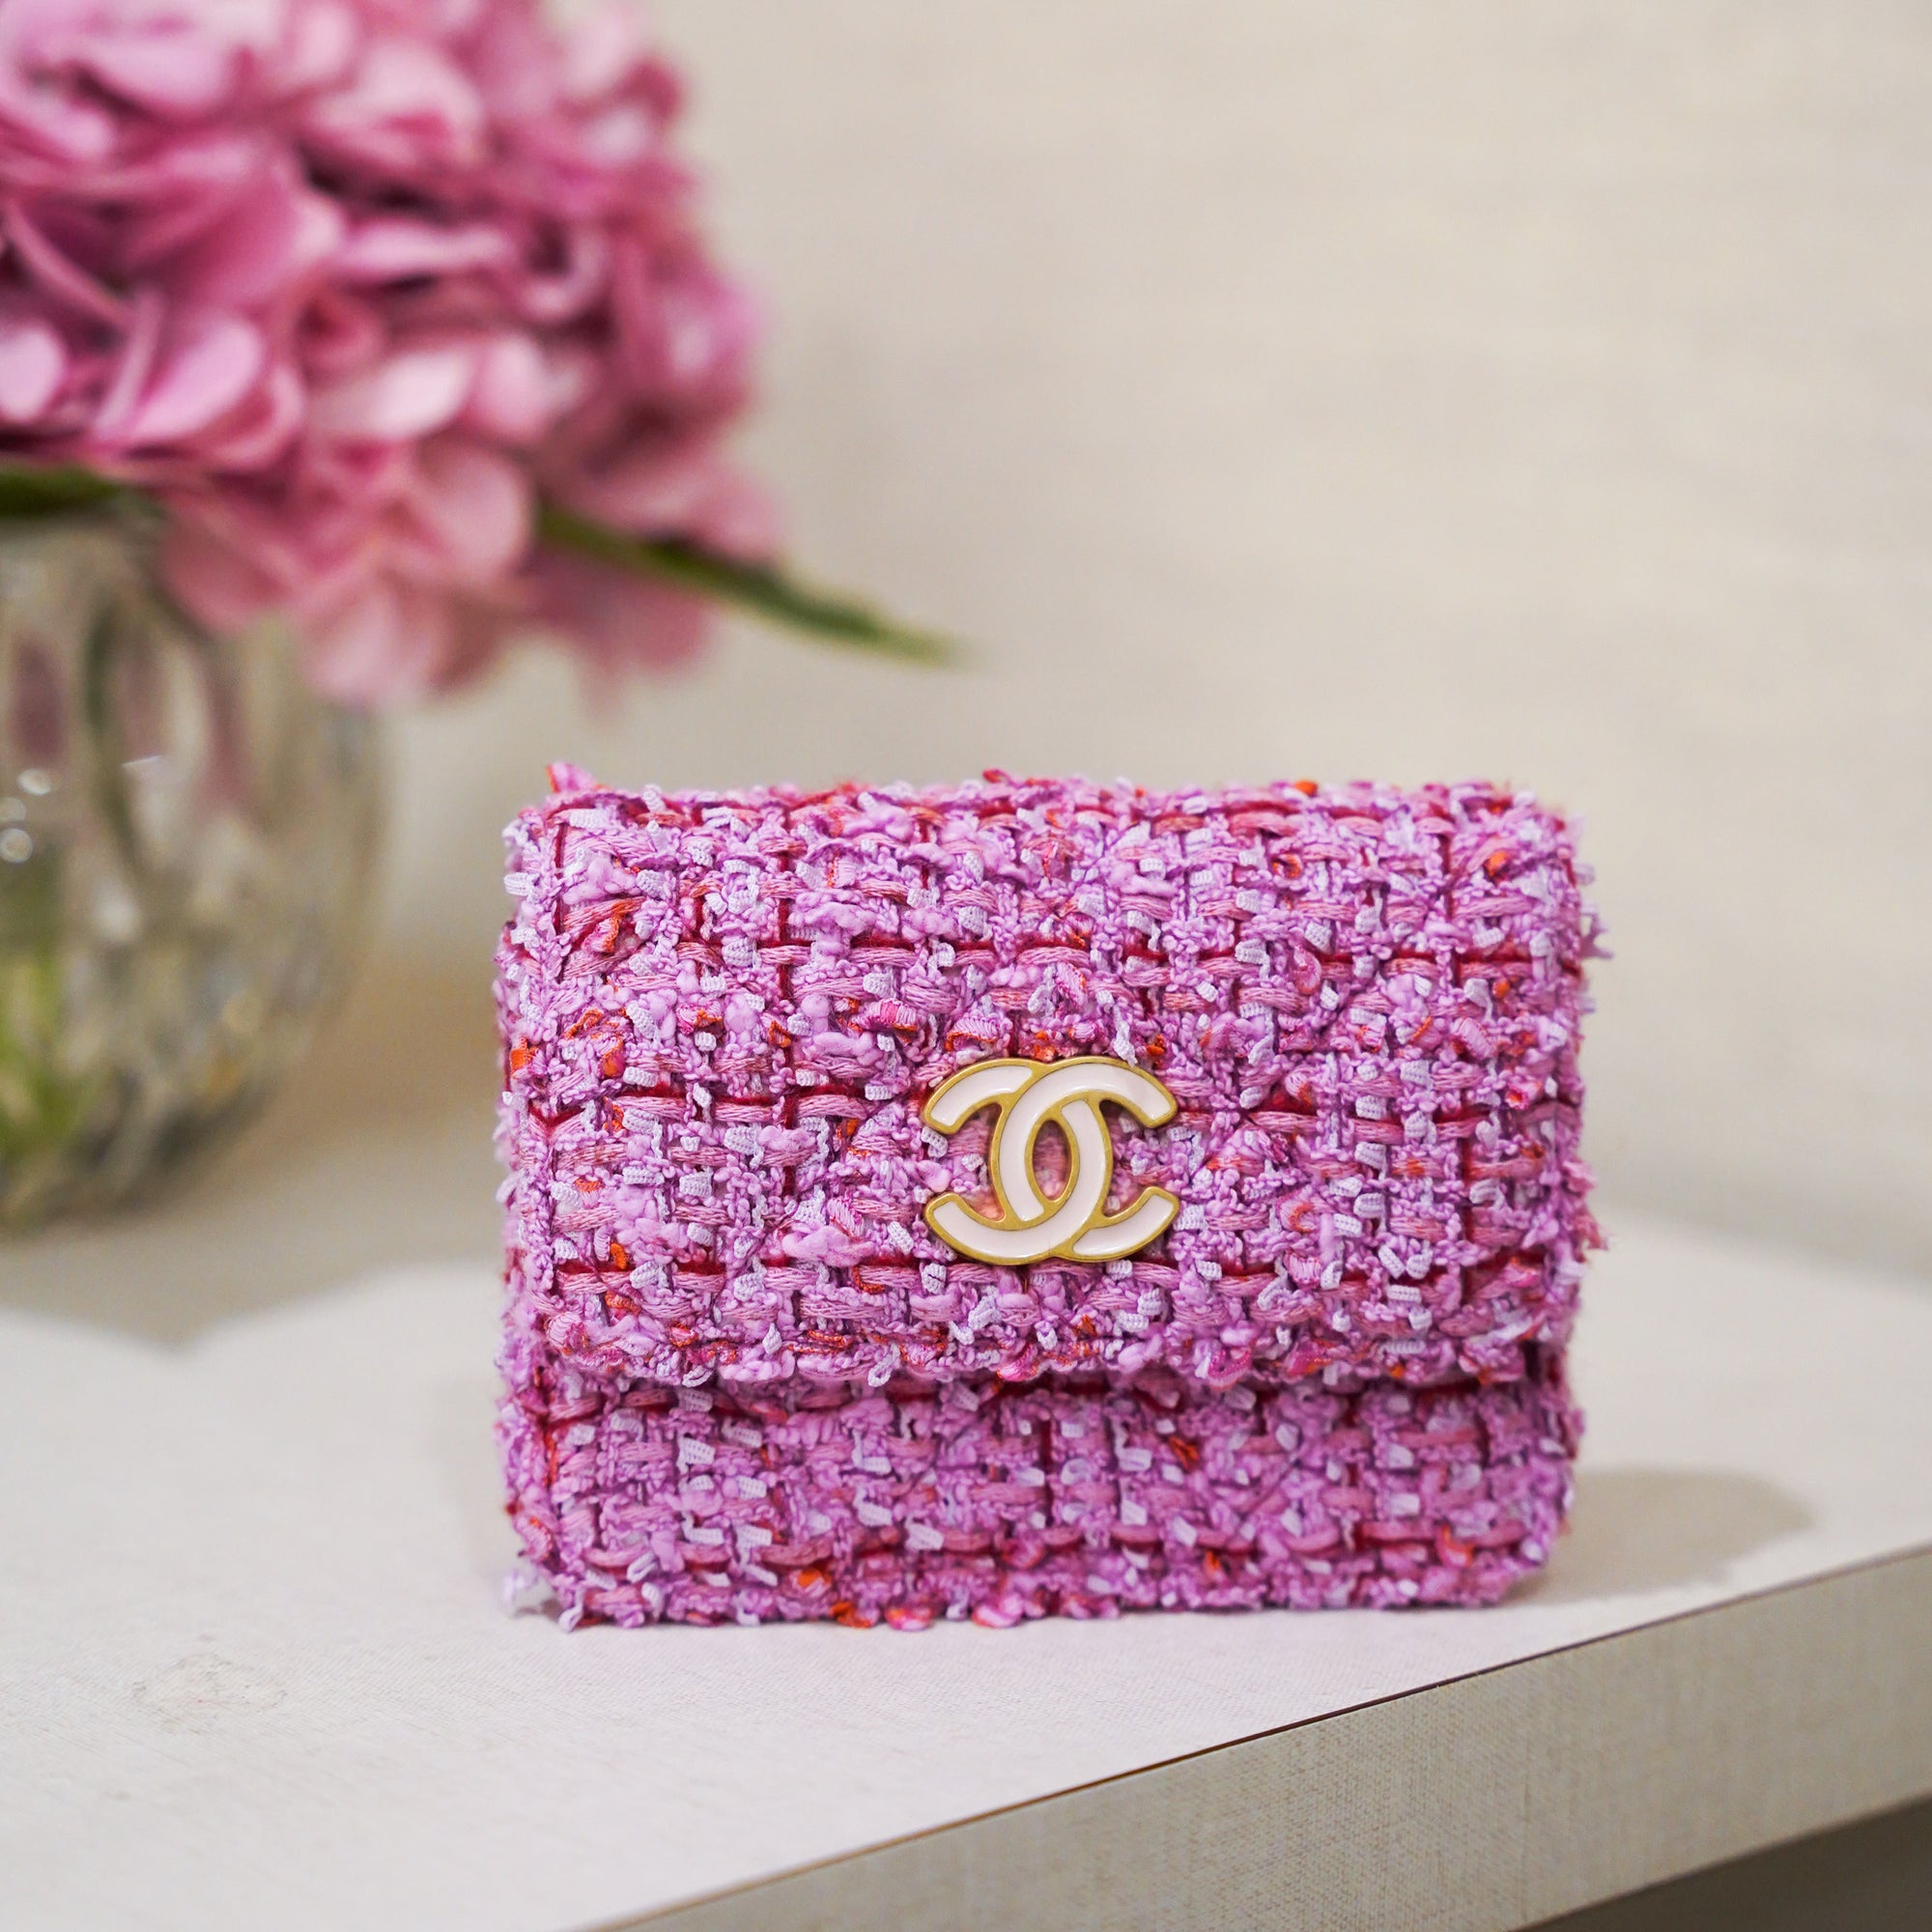 New CHANEL Pick me Up Pink Caviar Chain Waist Belt Bag  Fashion Reloved